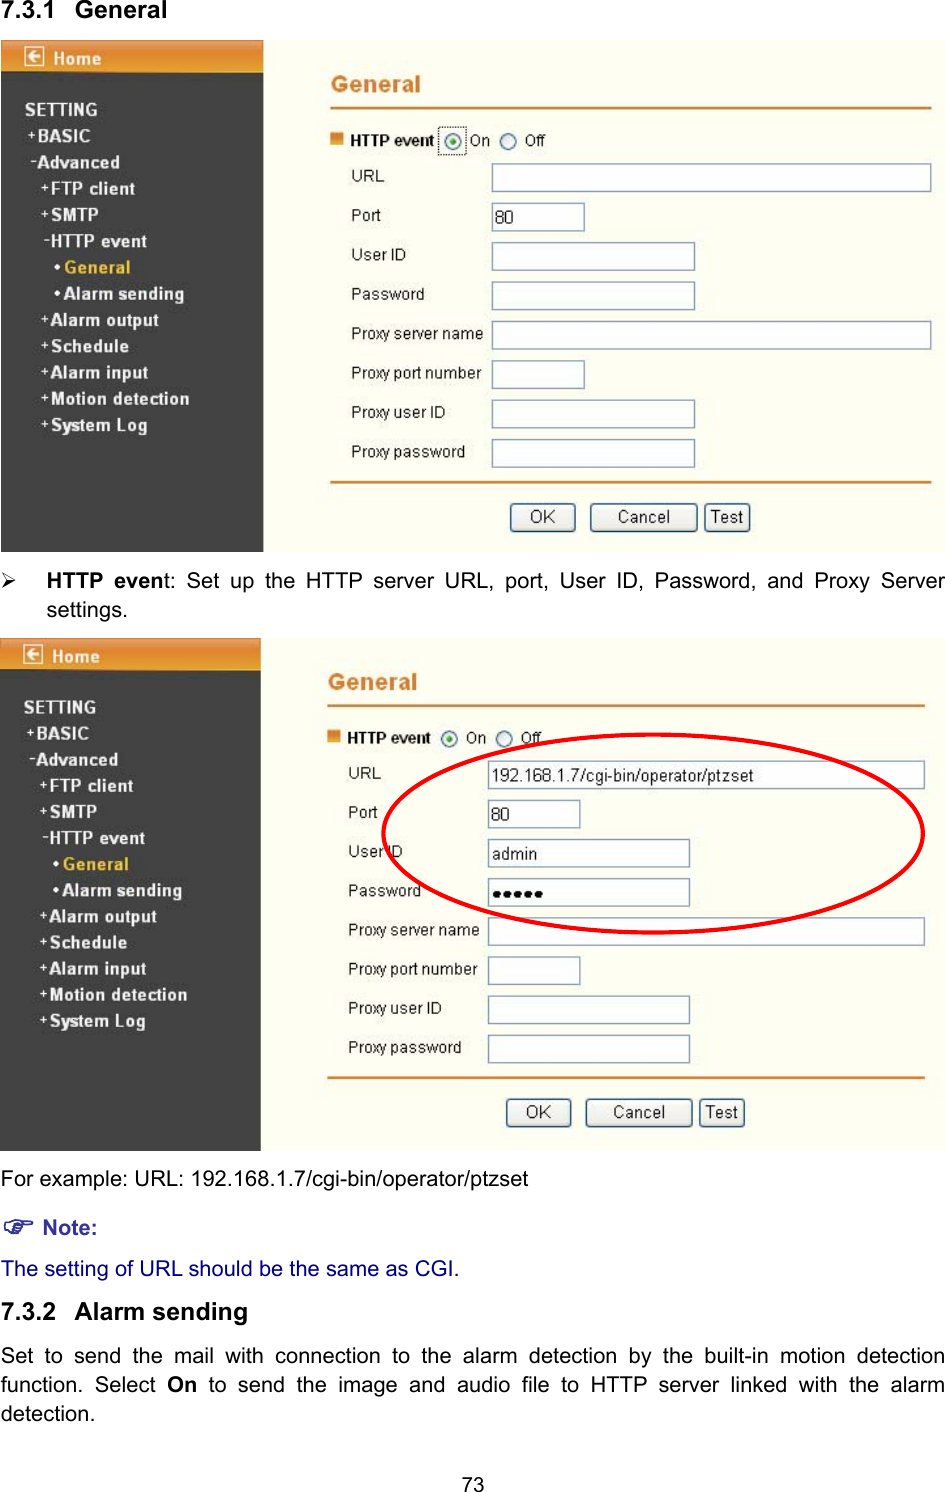 73 7.3.1  General  ¾ HTTP event: Set up the HTTP server URL, port, User ID, Password, and Proxy Server settings.  For example: URL: 192.168.1.7/cgi-bin/operator/ptzset ) Note: The setting of URL should be the same as CGI. 7.3.2  Alarm sending Set to send the mail with connection to the alarm detection by the built-in motion detection function. Select On to send the image and audio file to HTTP server linked with the alarm detection. 